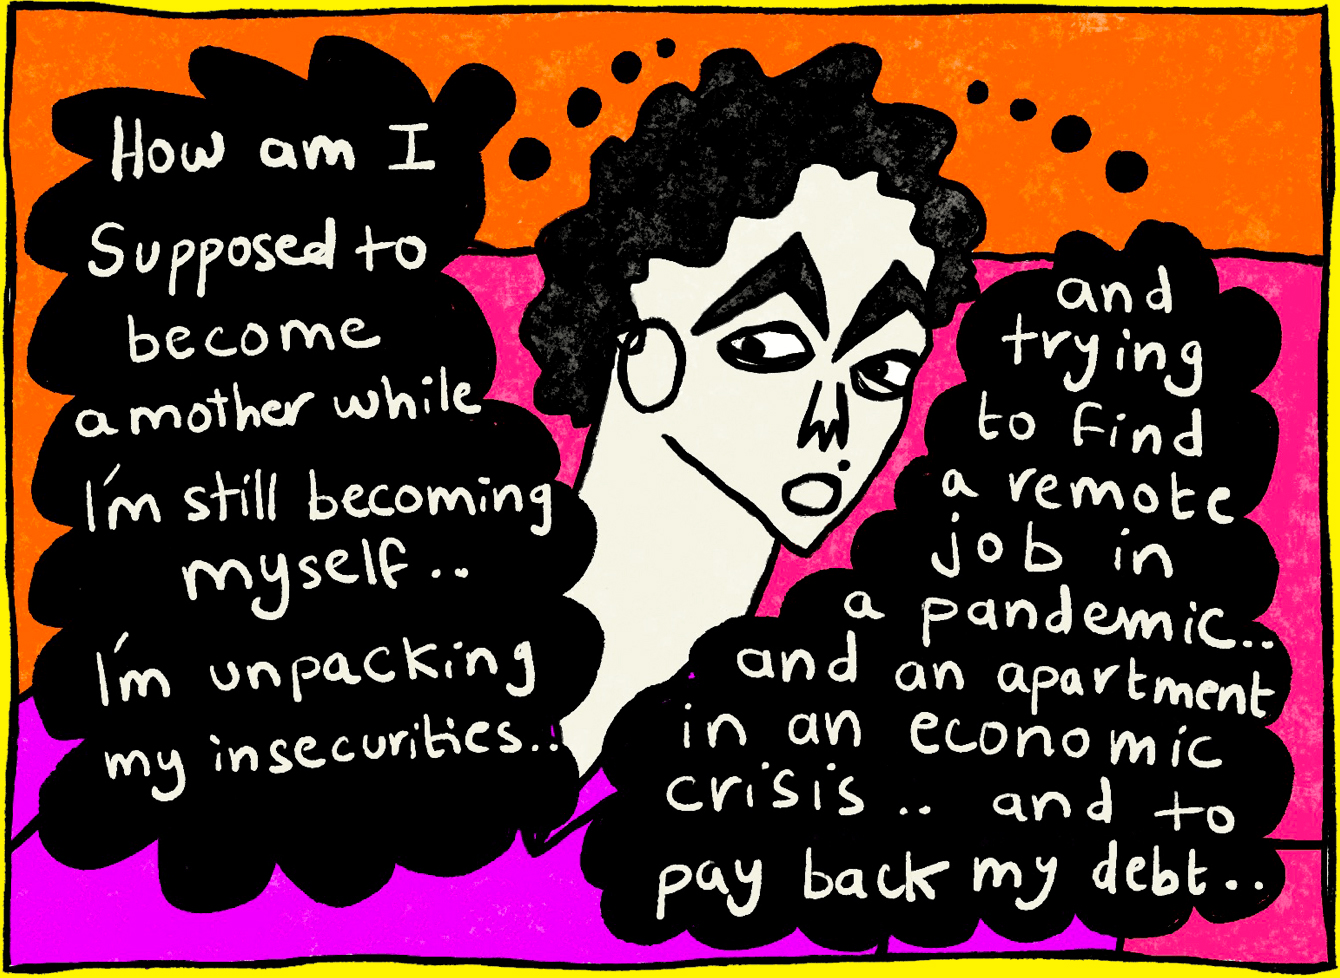 Panel three of four from a series of comic illustrations by Rawand Issa, depicting a gynecologist checkup. Rawand’s face is depicted in the middle of the frame, with two black speech bubbles to her right and left. The speech bubble on the left reads, “How am I supposed to become a mother while I’m still becoming myself … I’m unpacking my insecurities …” The speech bubble on the right reads, “and trying to find a remote job in a pandemic … and an apartment in an economic crisis … and to pay back my debt …”